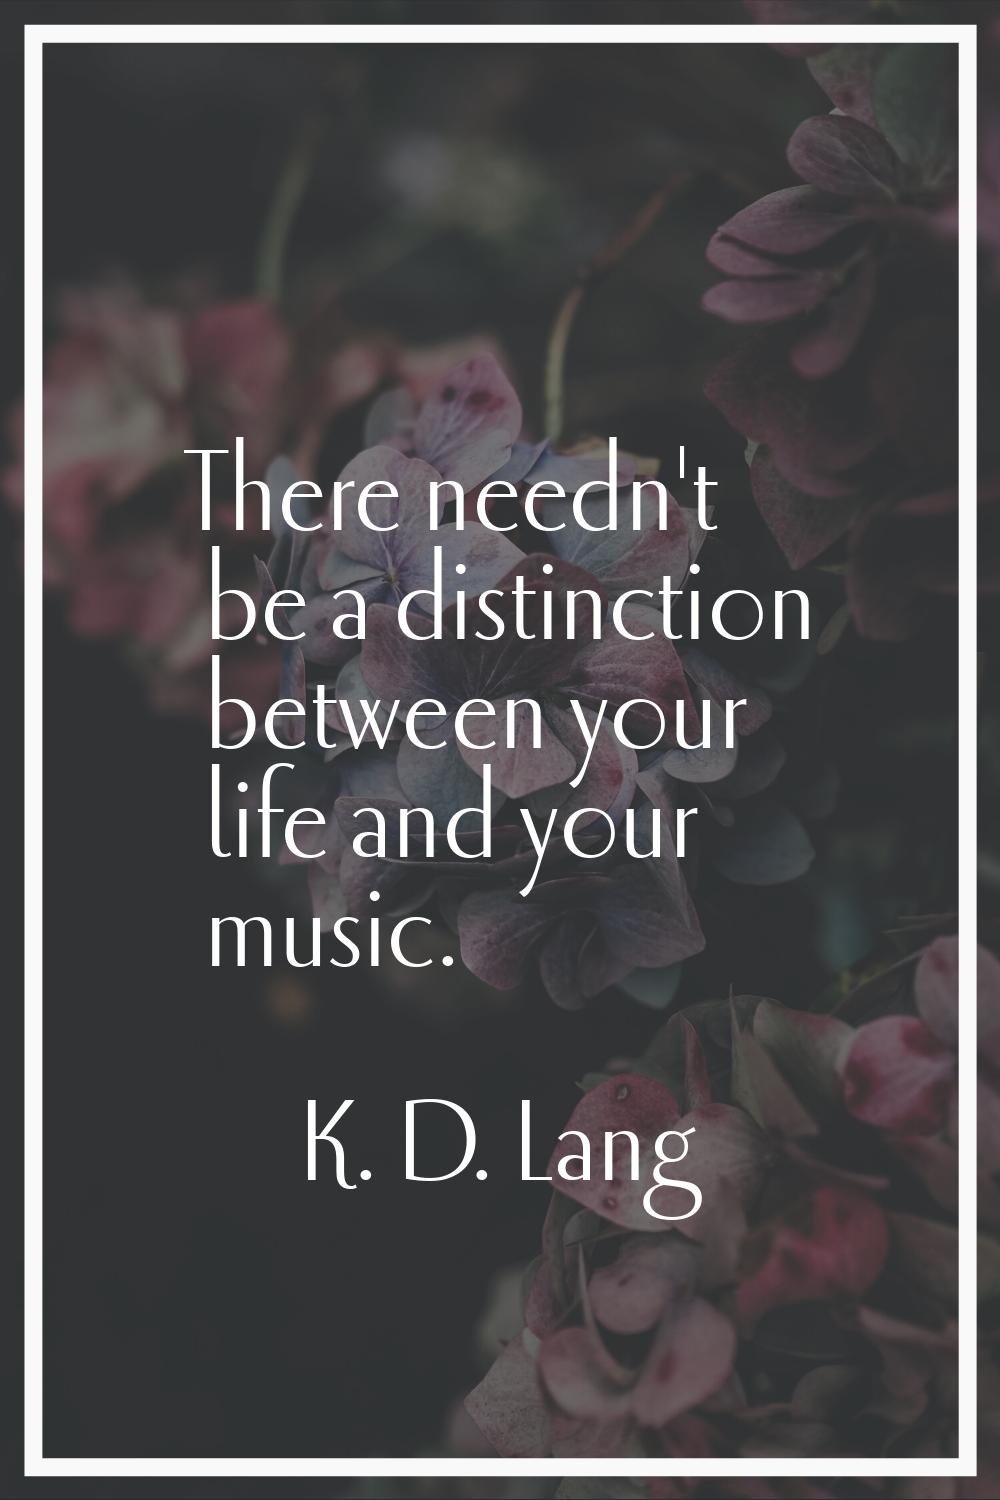 There needn't be a distinction between your life and your music.